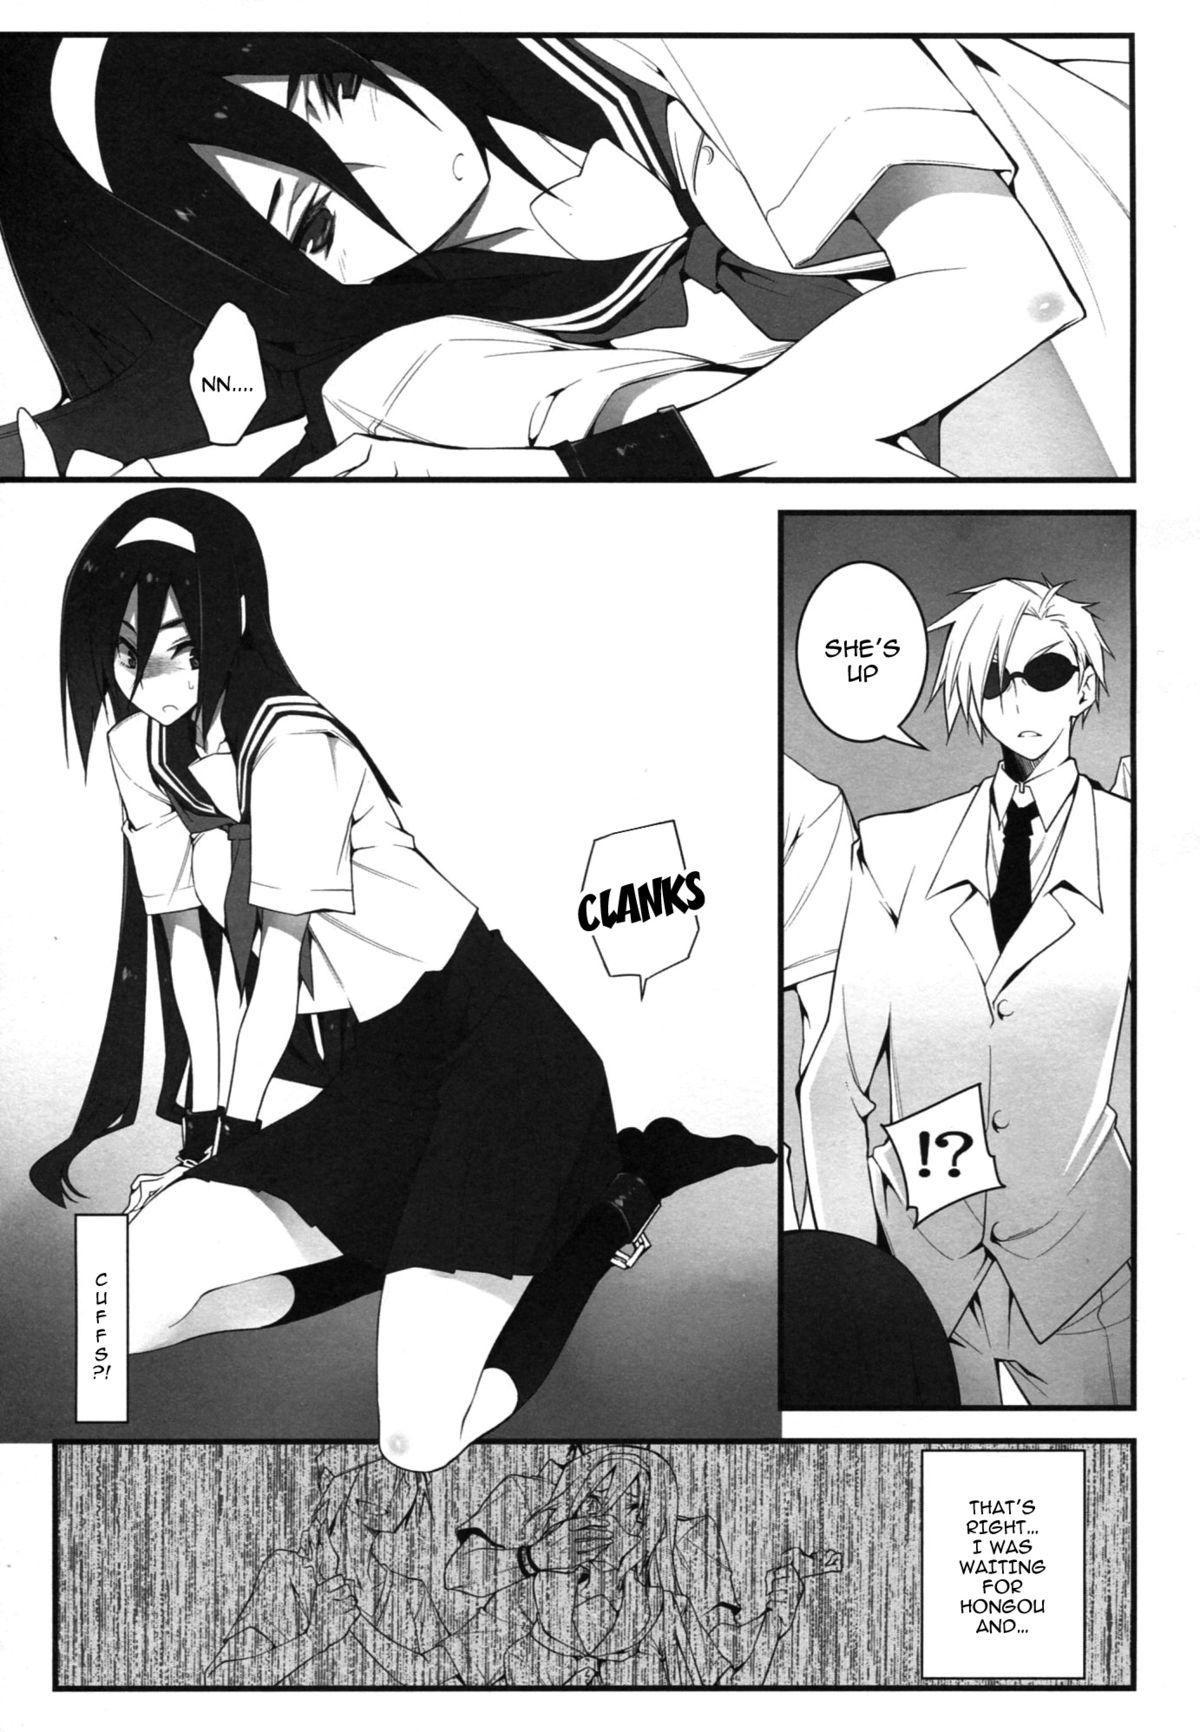 Storyline THE EMPRESS REVERSED - Hyouka Maid - Page 6